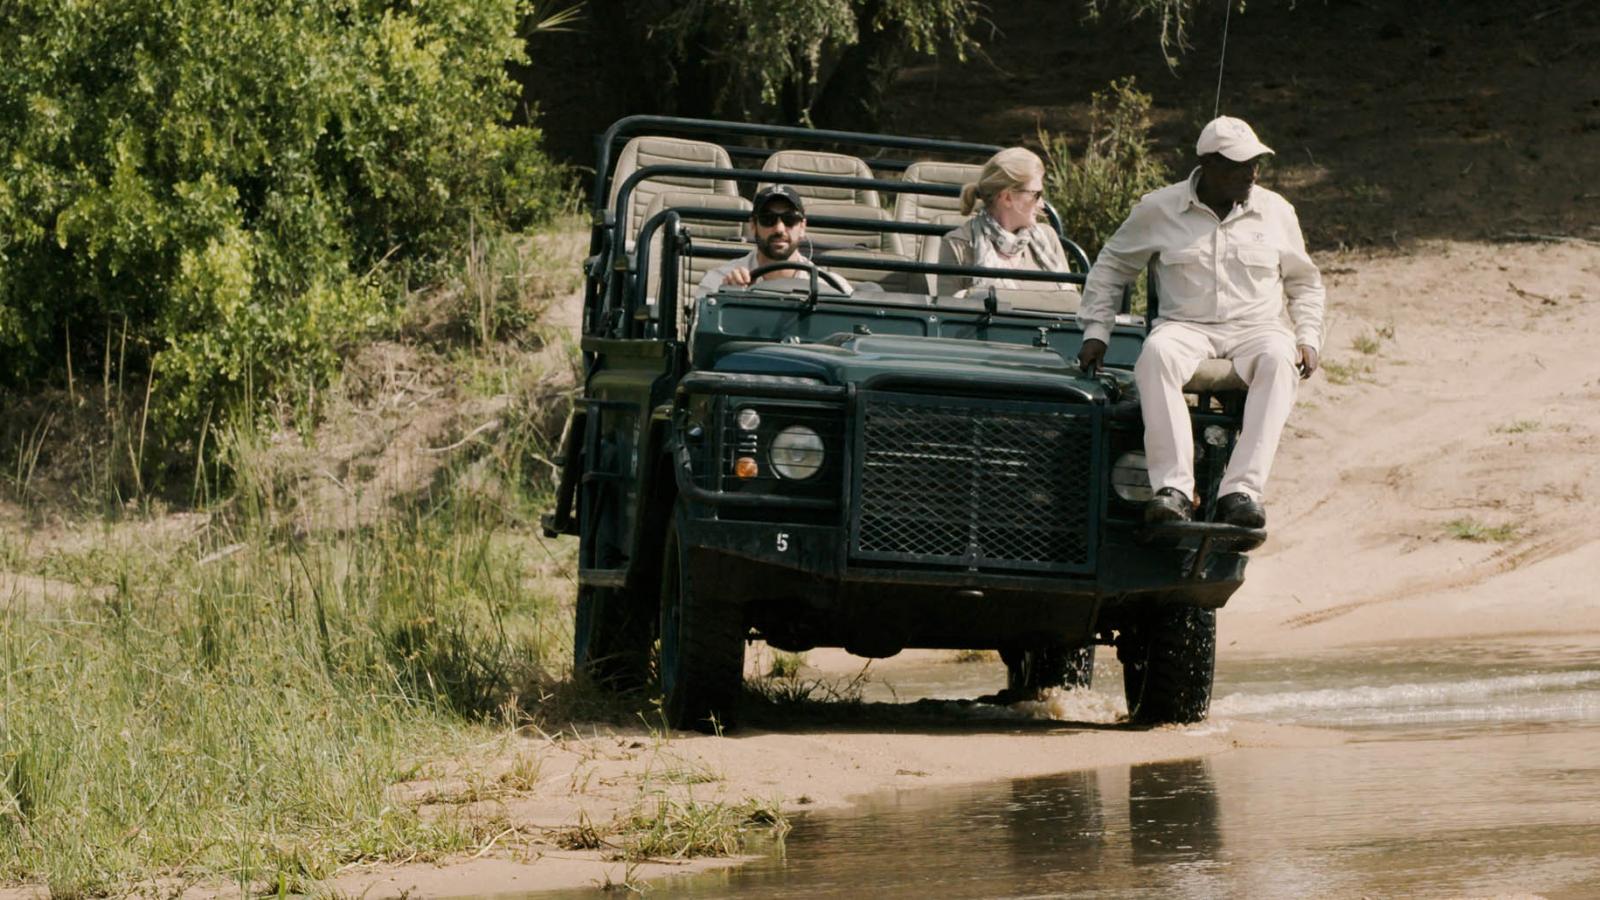 Why should you travel with a specialist on safari?